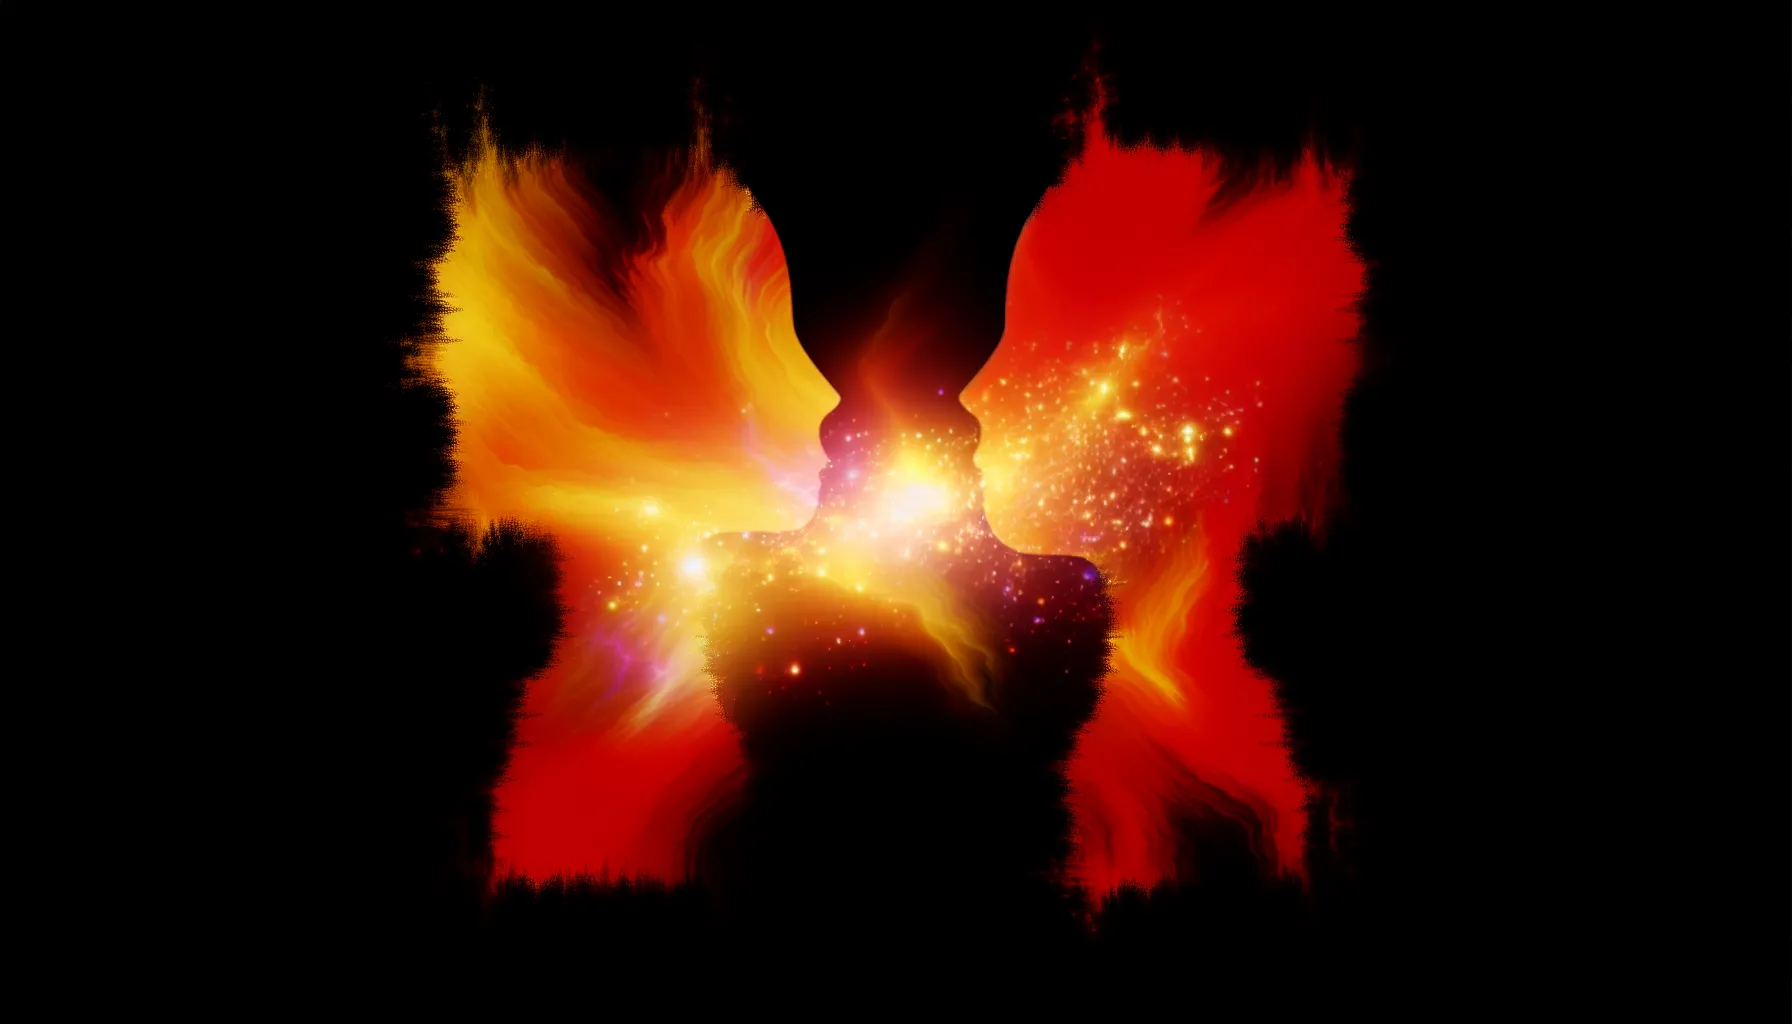 <strong>When Sparks Fly:</strong> Witness the dance of destiny where hearts are drawn together, igniting the flames of possibility in love's tender embrace.